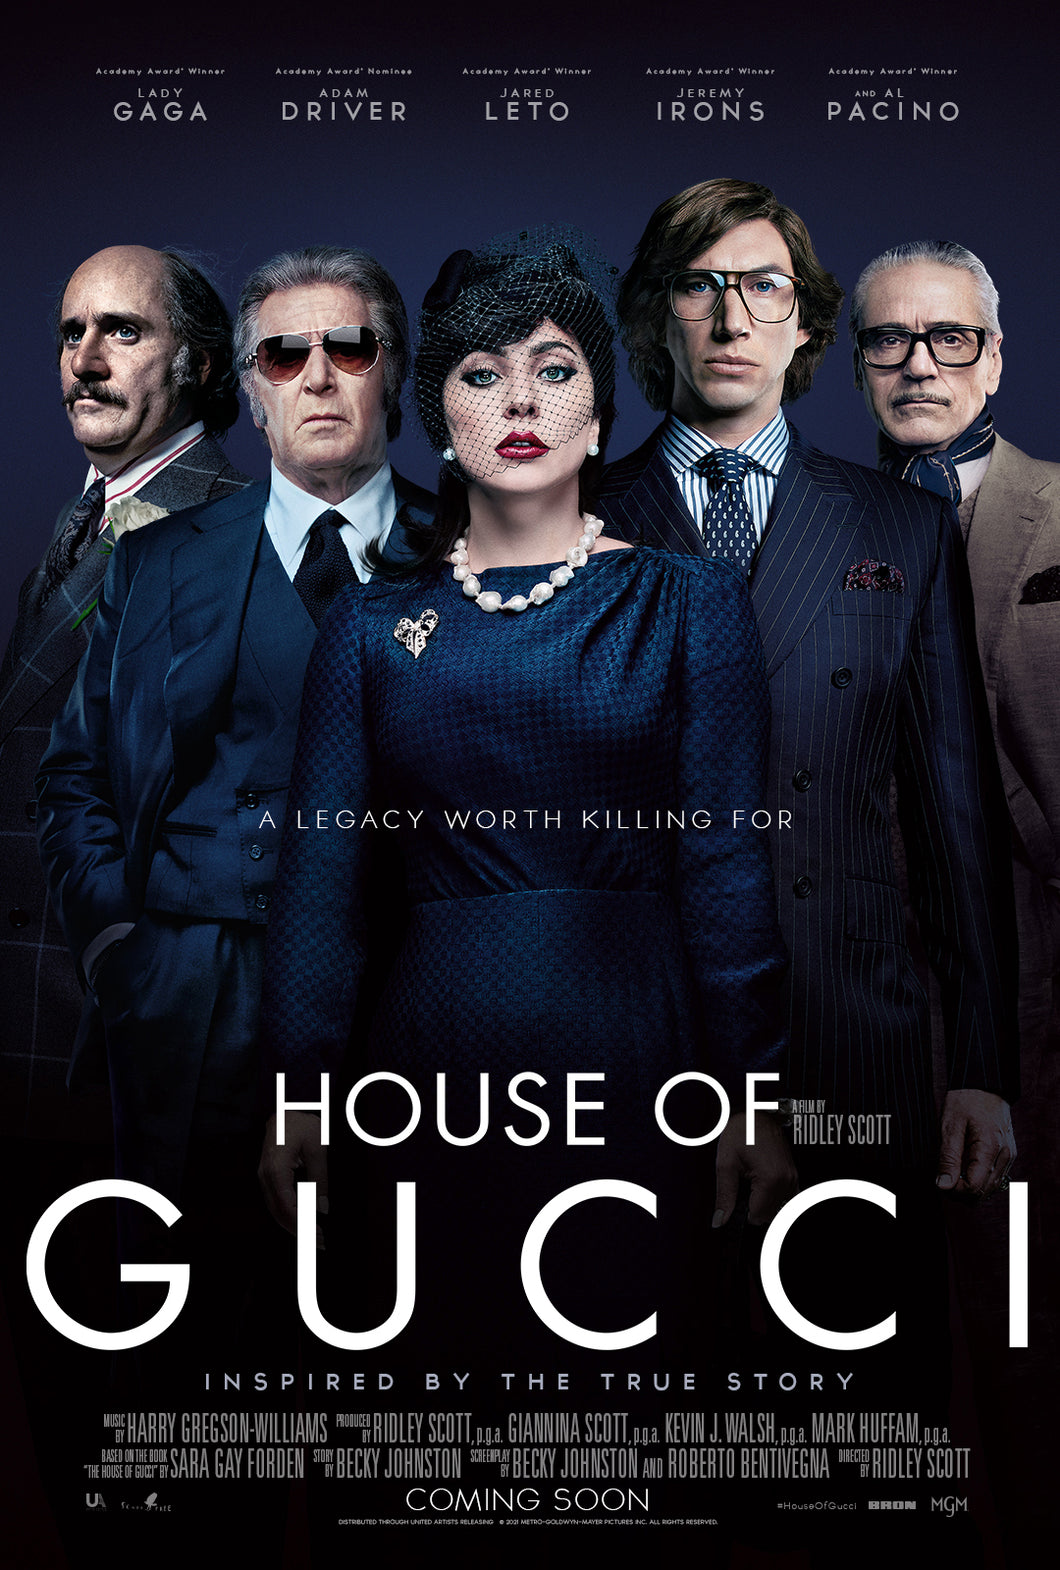 House Of Gucci - iTunes only (02/27)